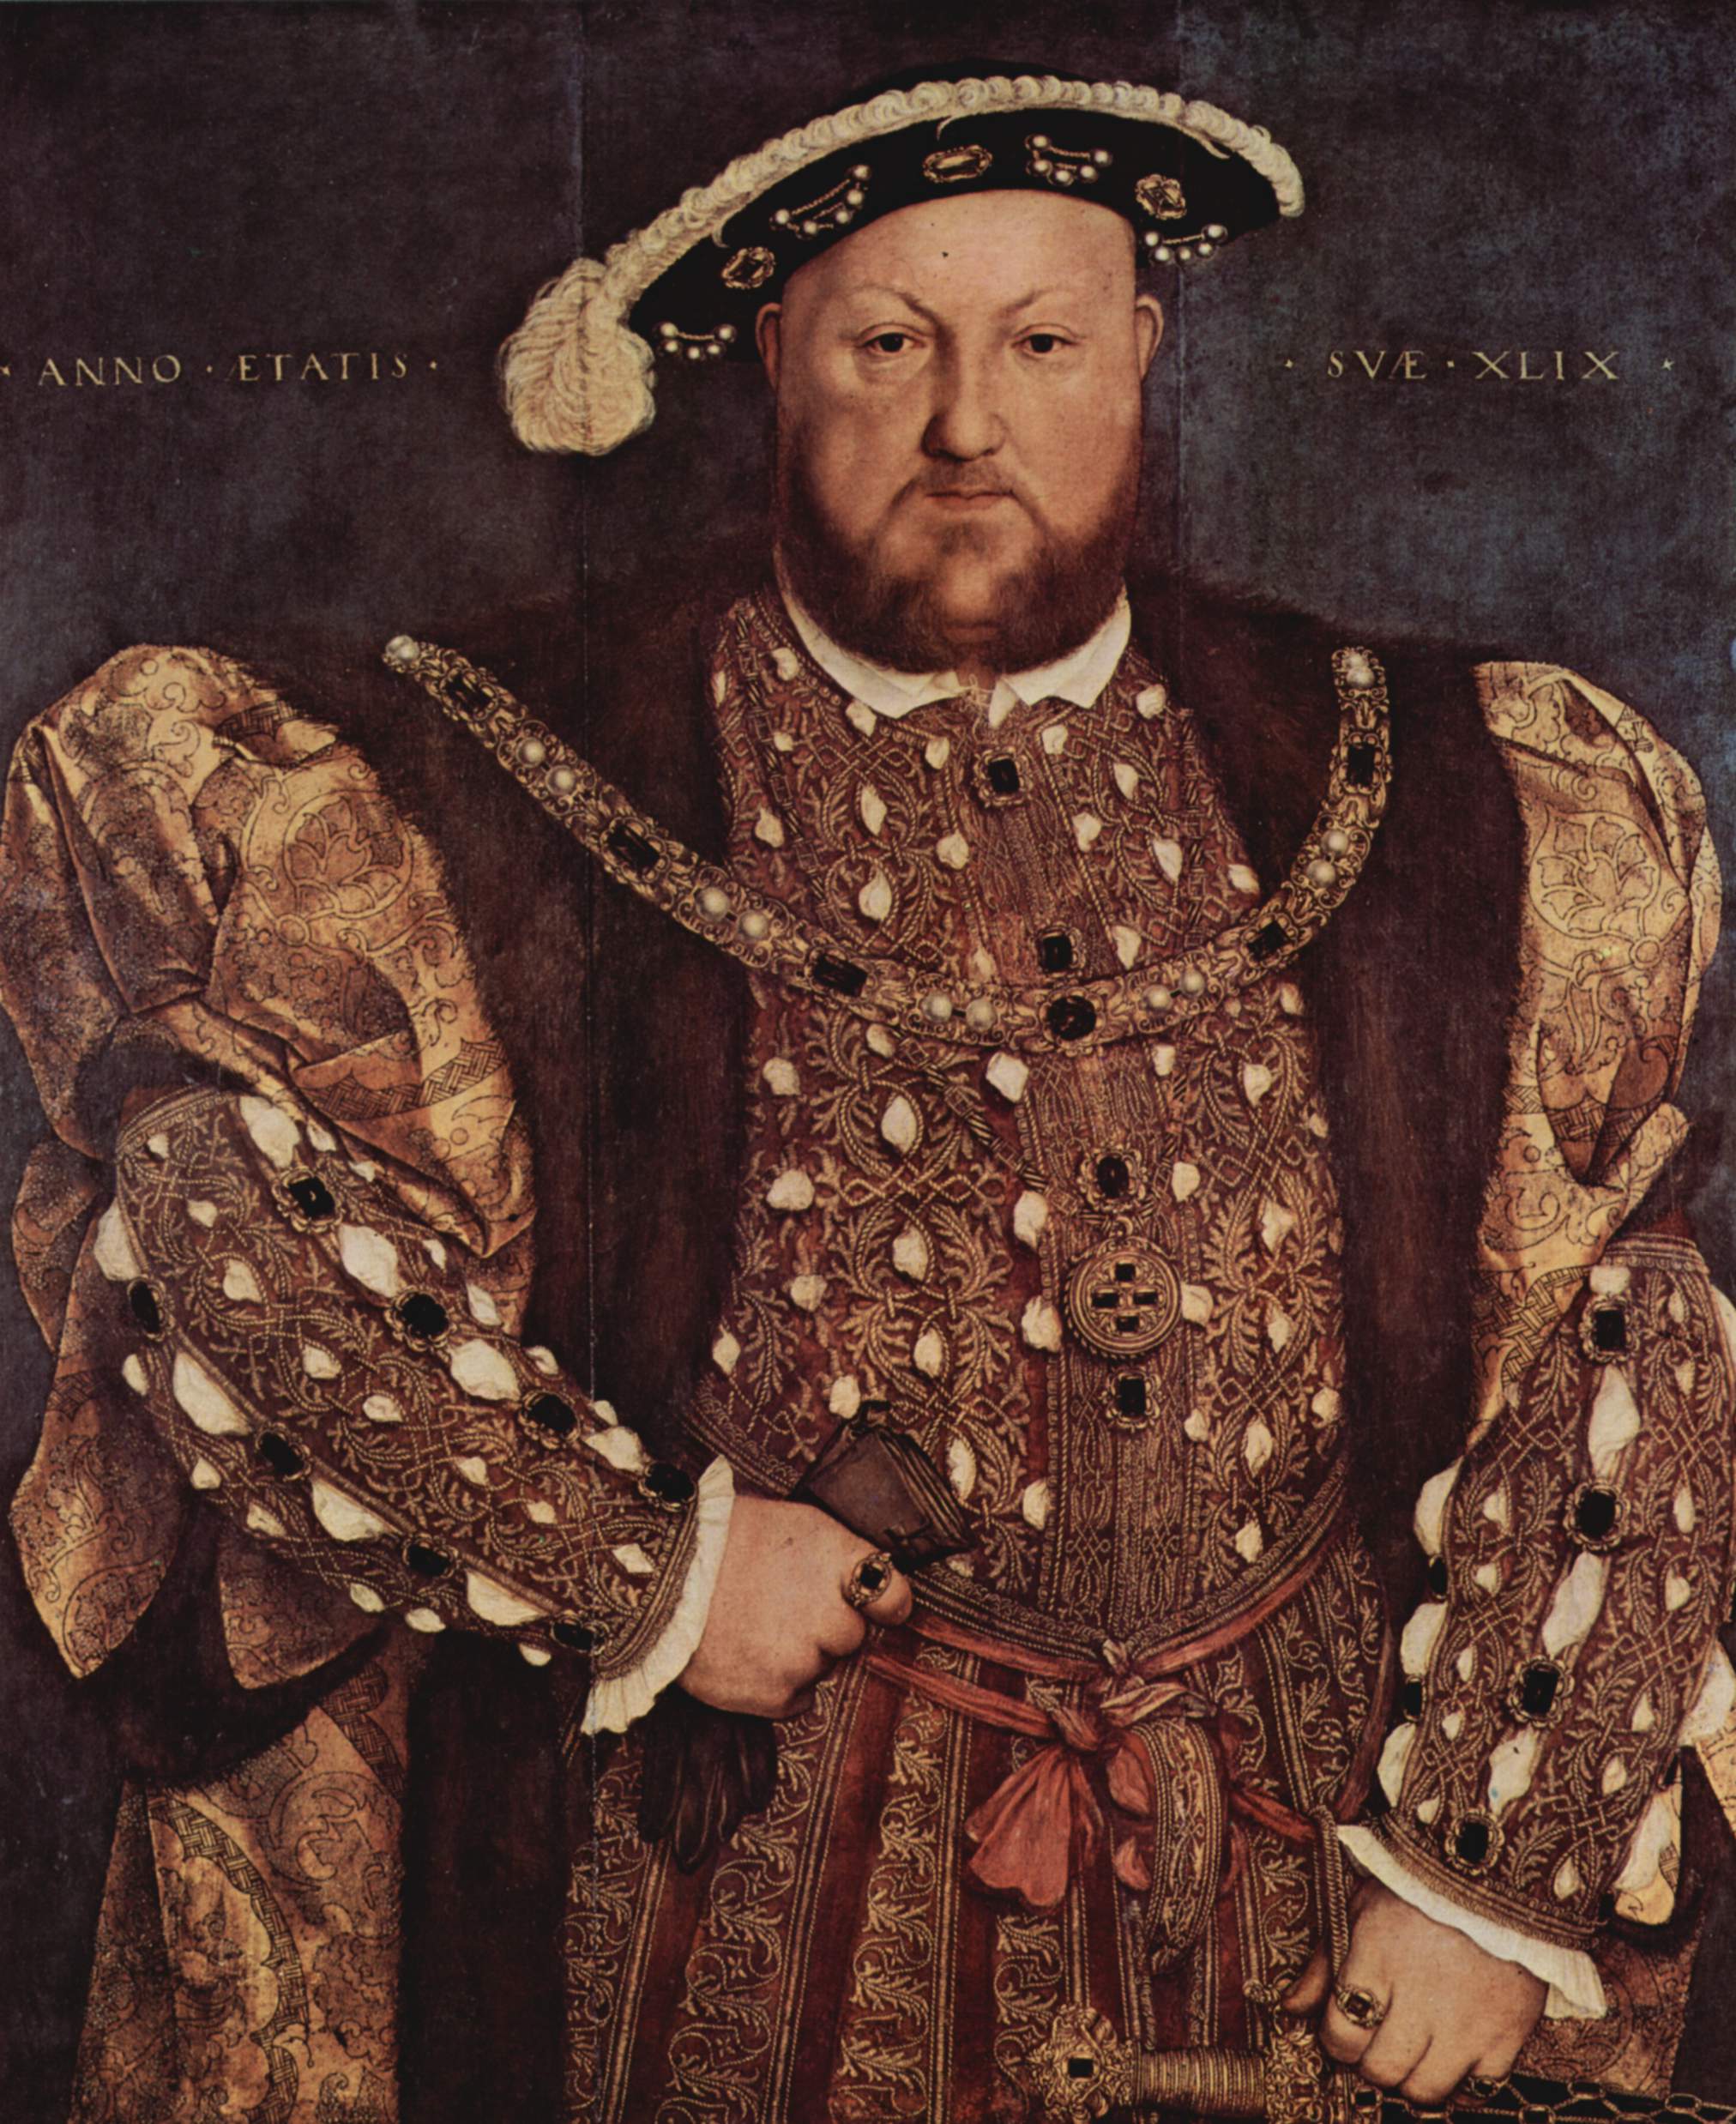 Hans Holbein's portrait of King Henry VIII.